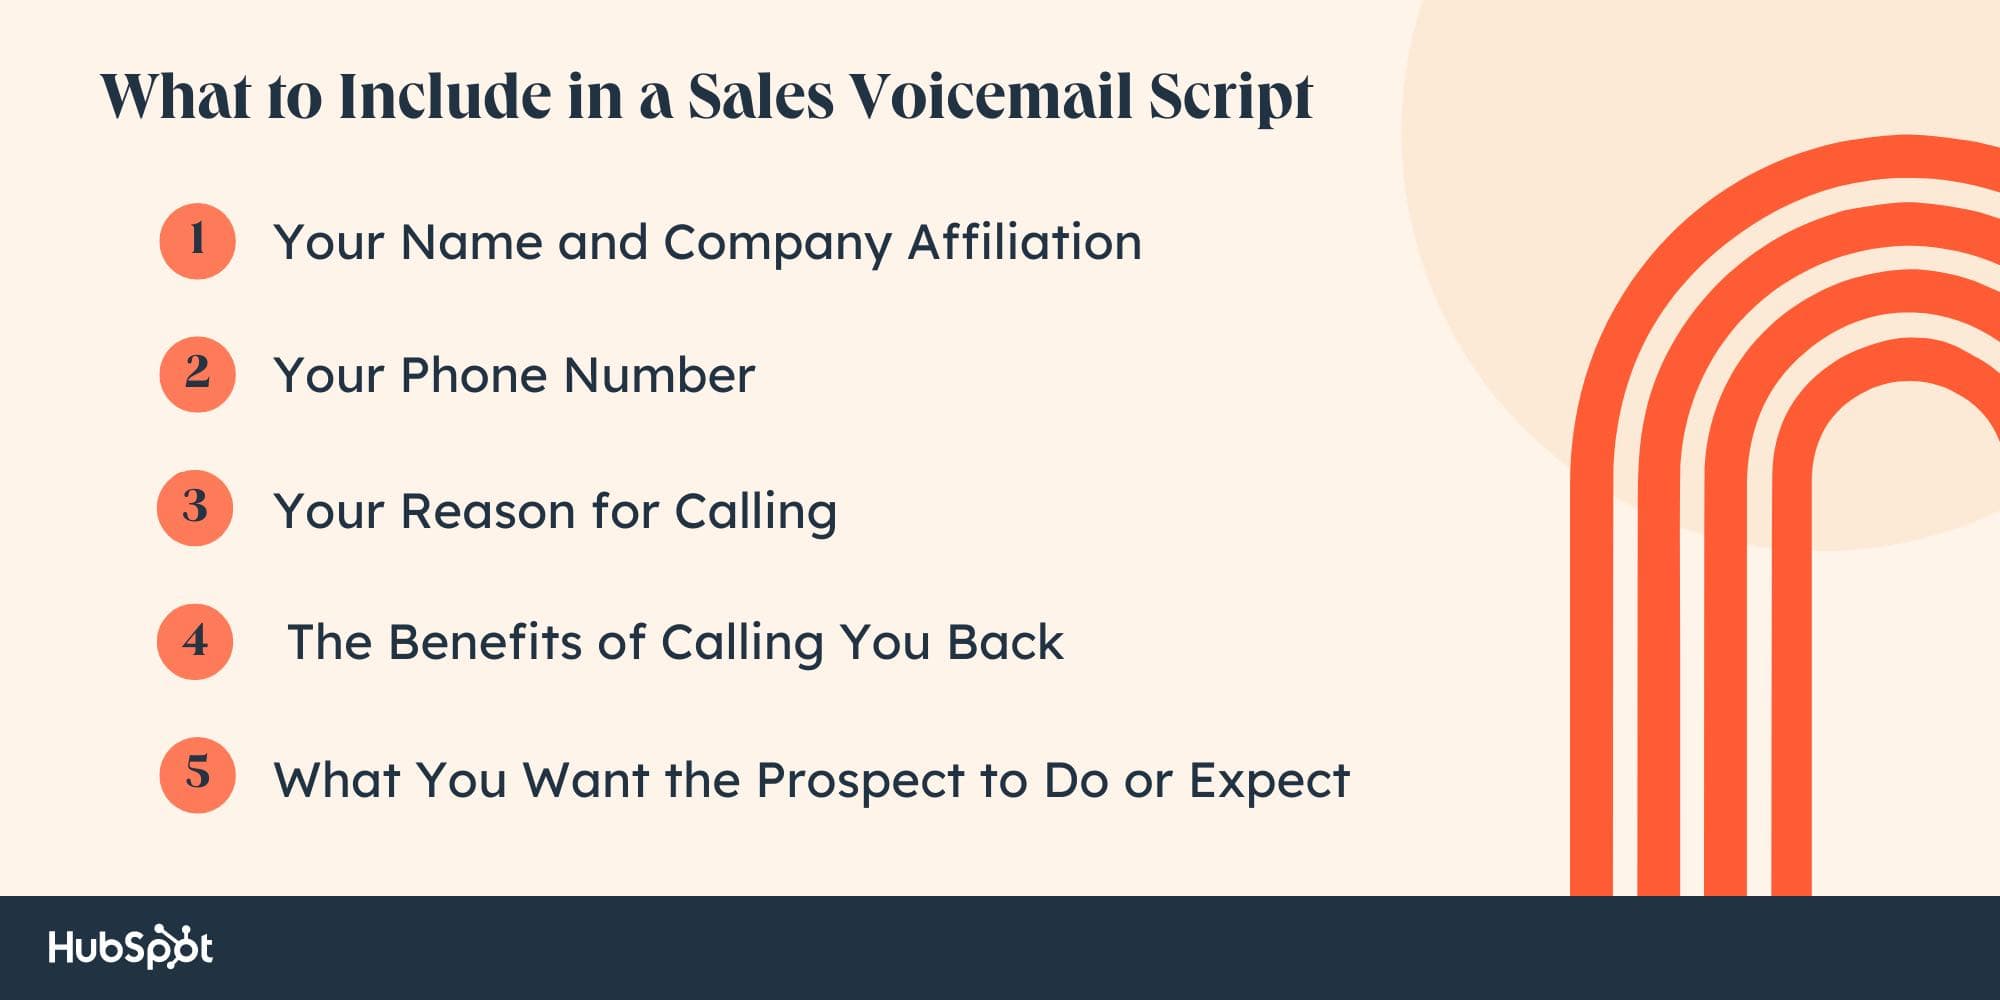 What to Include in a Sales Voicemail Script. Your Name and Company Affiliation What You Want the Prospect to Do or Expect. Your Phone Number. Your Reason for Calling. The Benefits of Calling You Back.